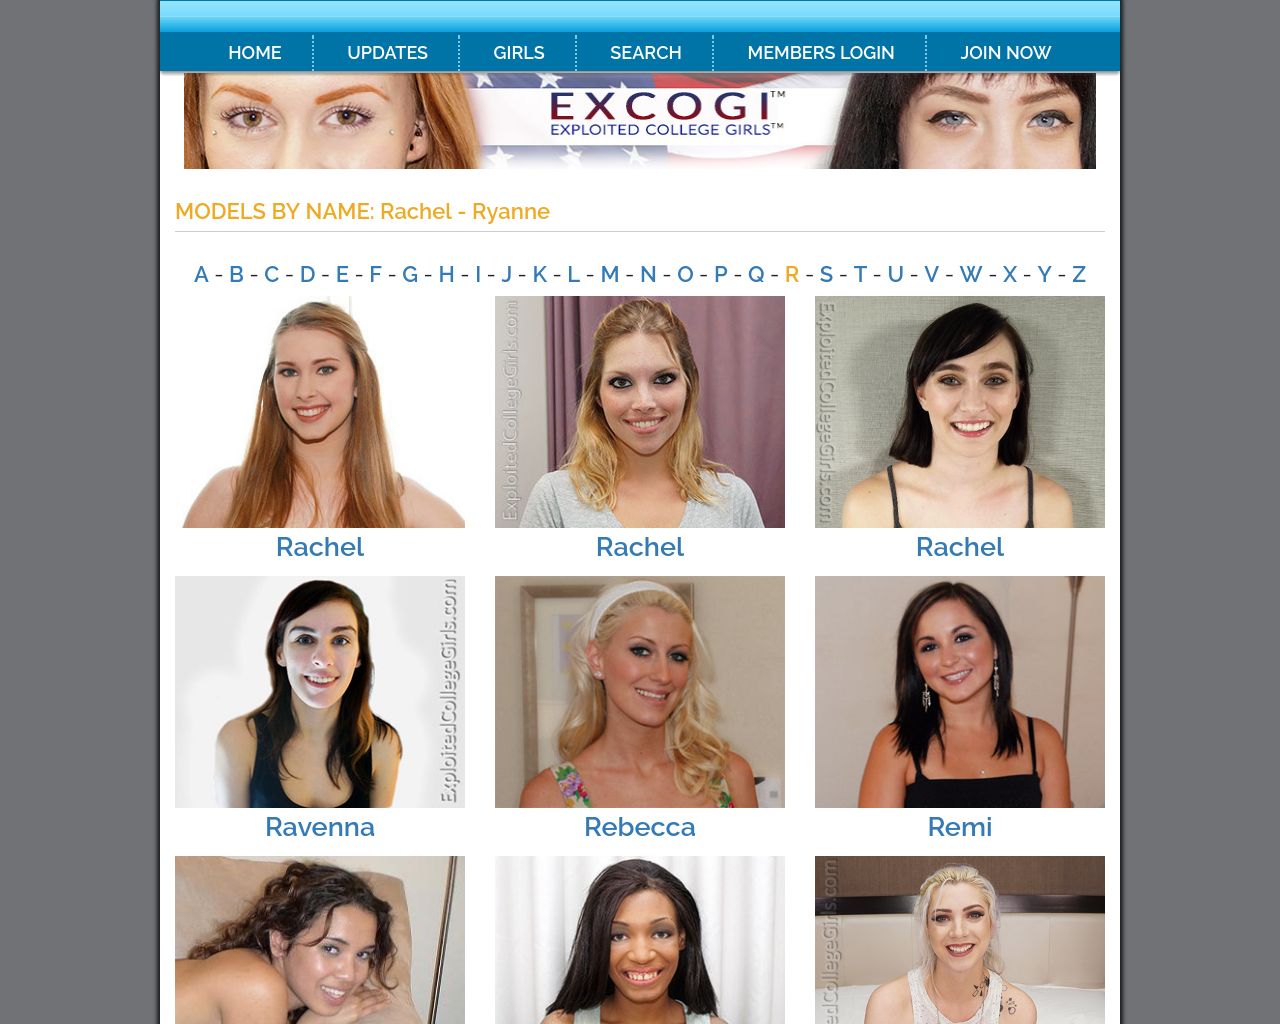 0day free premiumbackdoors for exploitedcollegegirls handed over by Conway from Miami